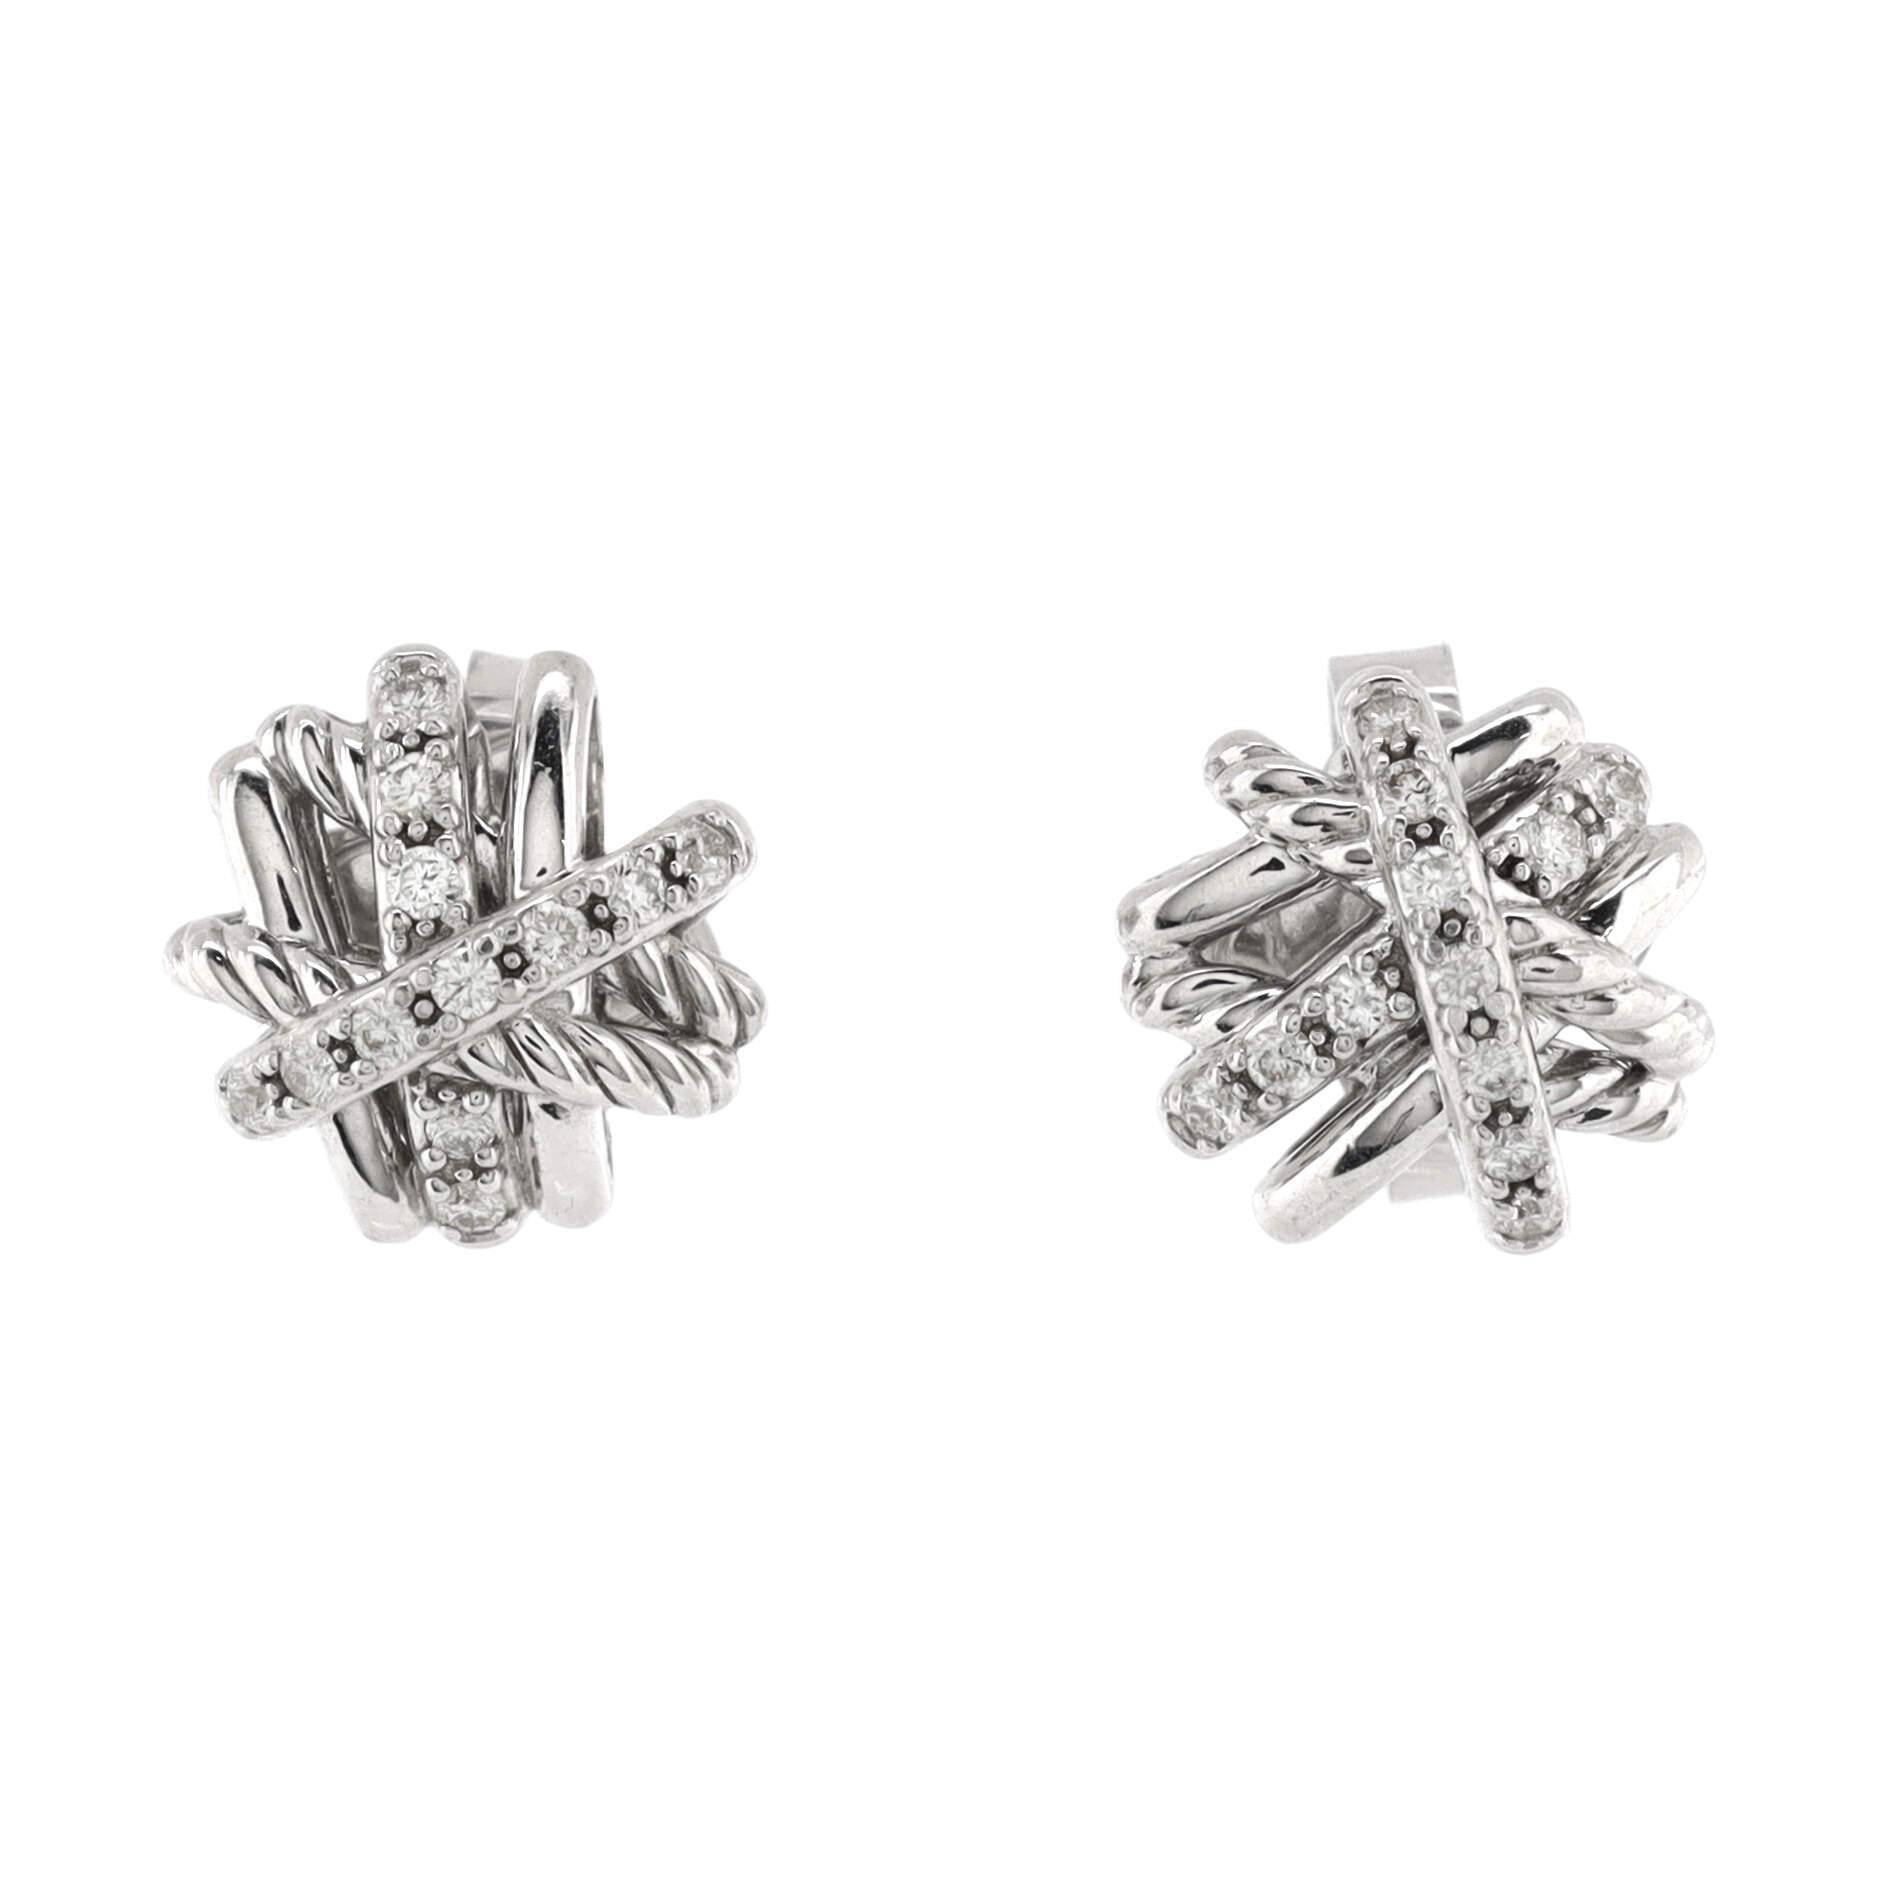 Condition: Great. Faint wear throughout,
Accessories: No Accessories
Measurements: Height/Length: 16.9 mm, Width: 16.75 mm
Designer: David Yurman
Model: Crossover Stud Earrings Sterling Silver with Diamonds
Exterior Color: Green, Silver
Item Number: